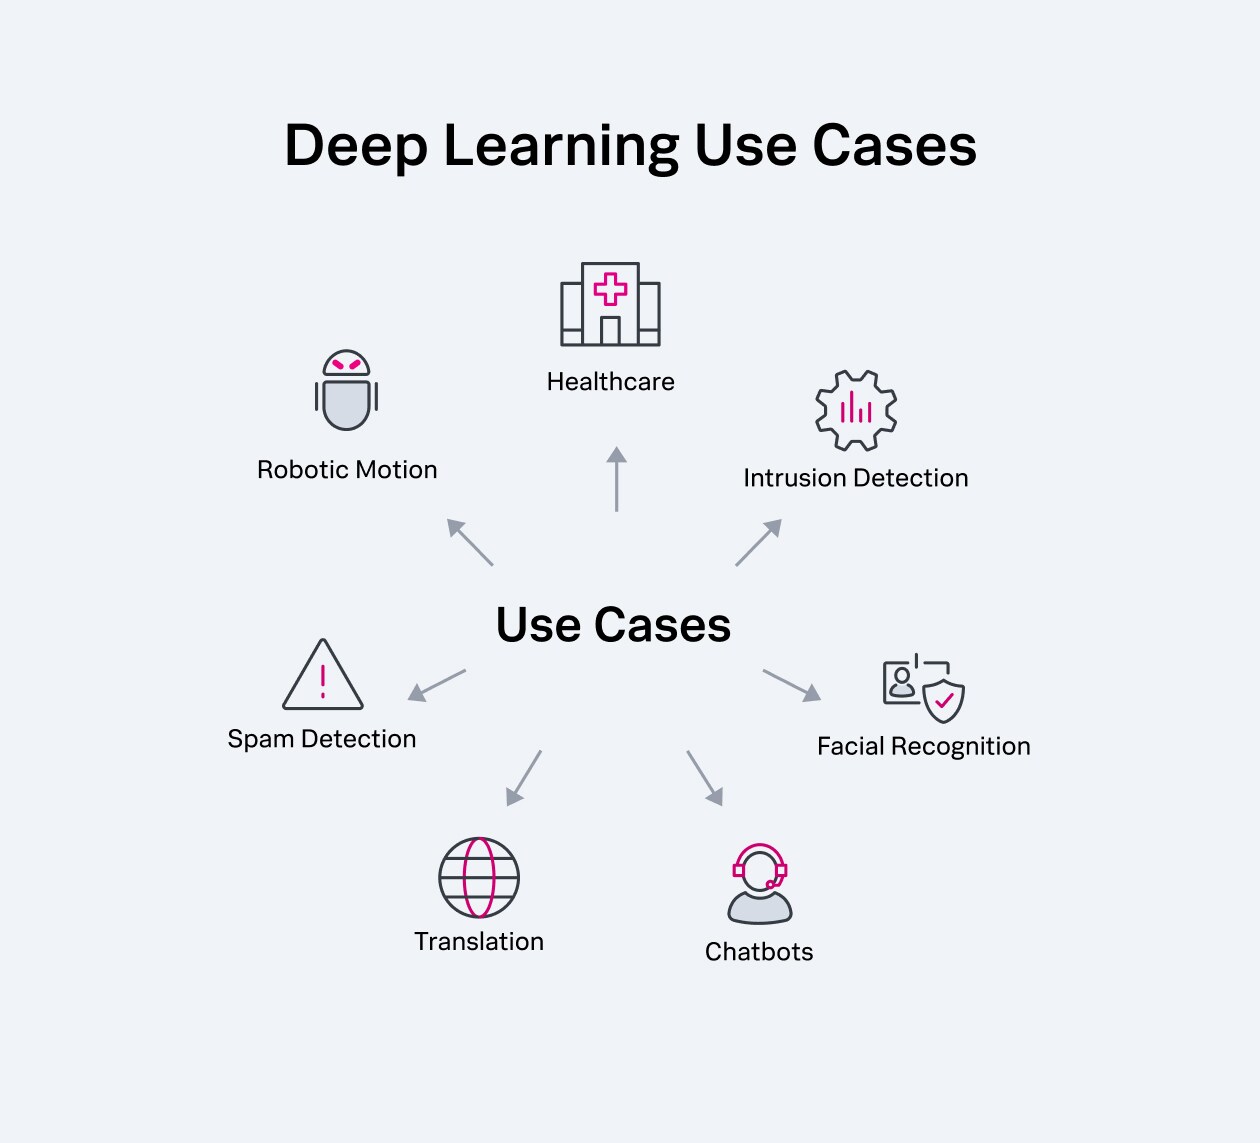 Deep Learning Use Cases